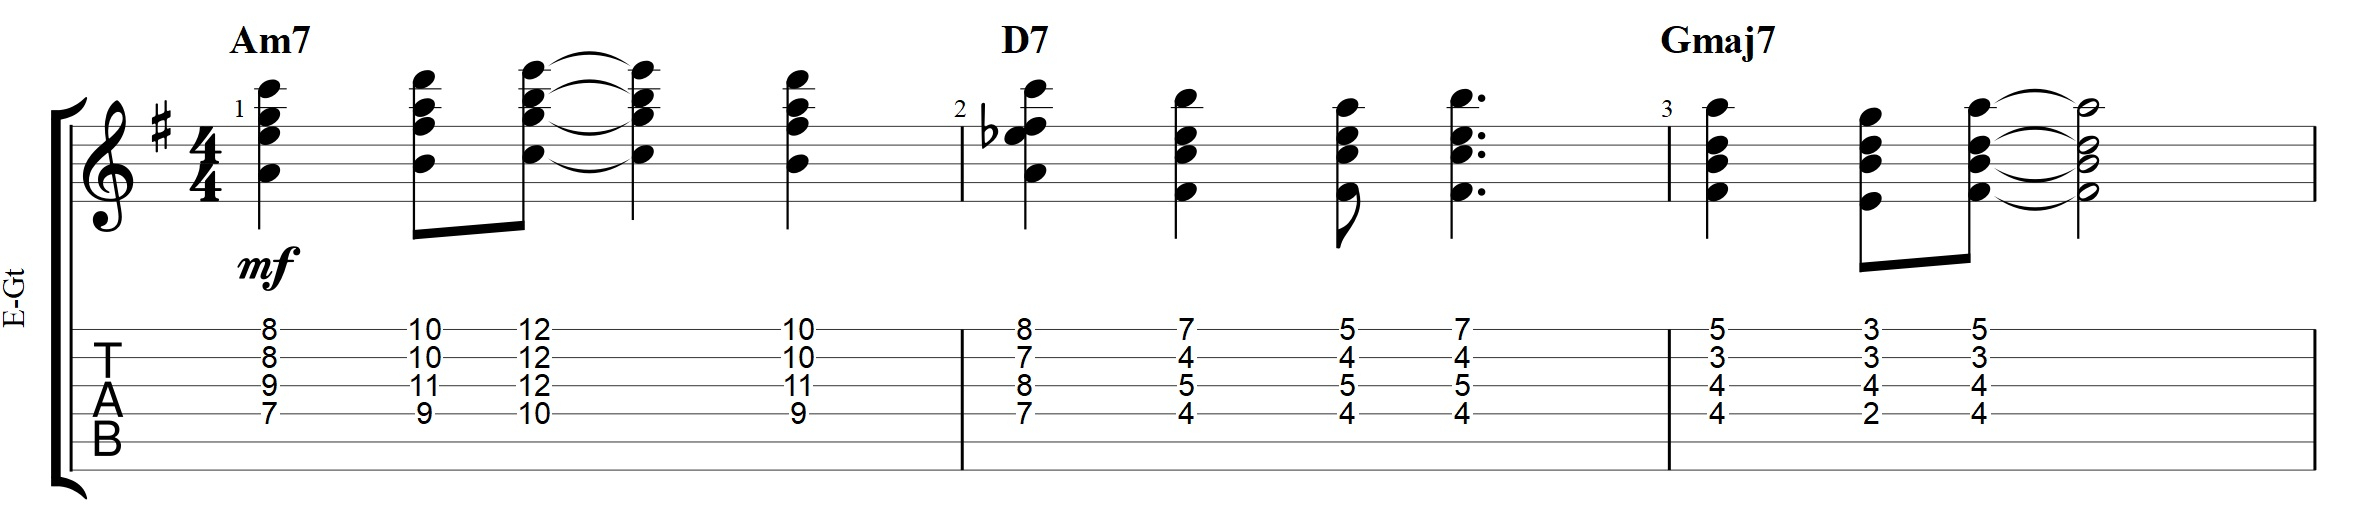 Bm7 Guitar Chord Passing Chords The 3 Types You Need For Comping And Chord Solos